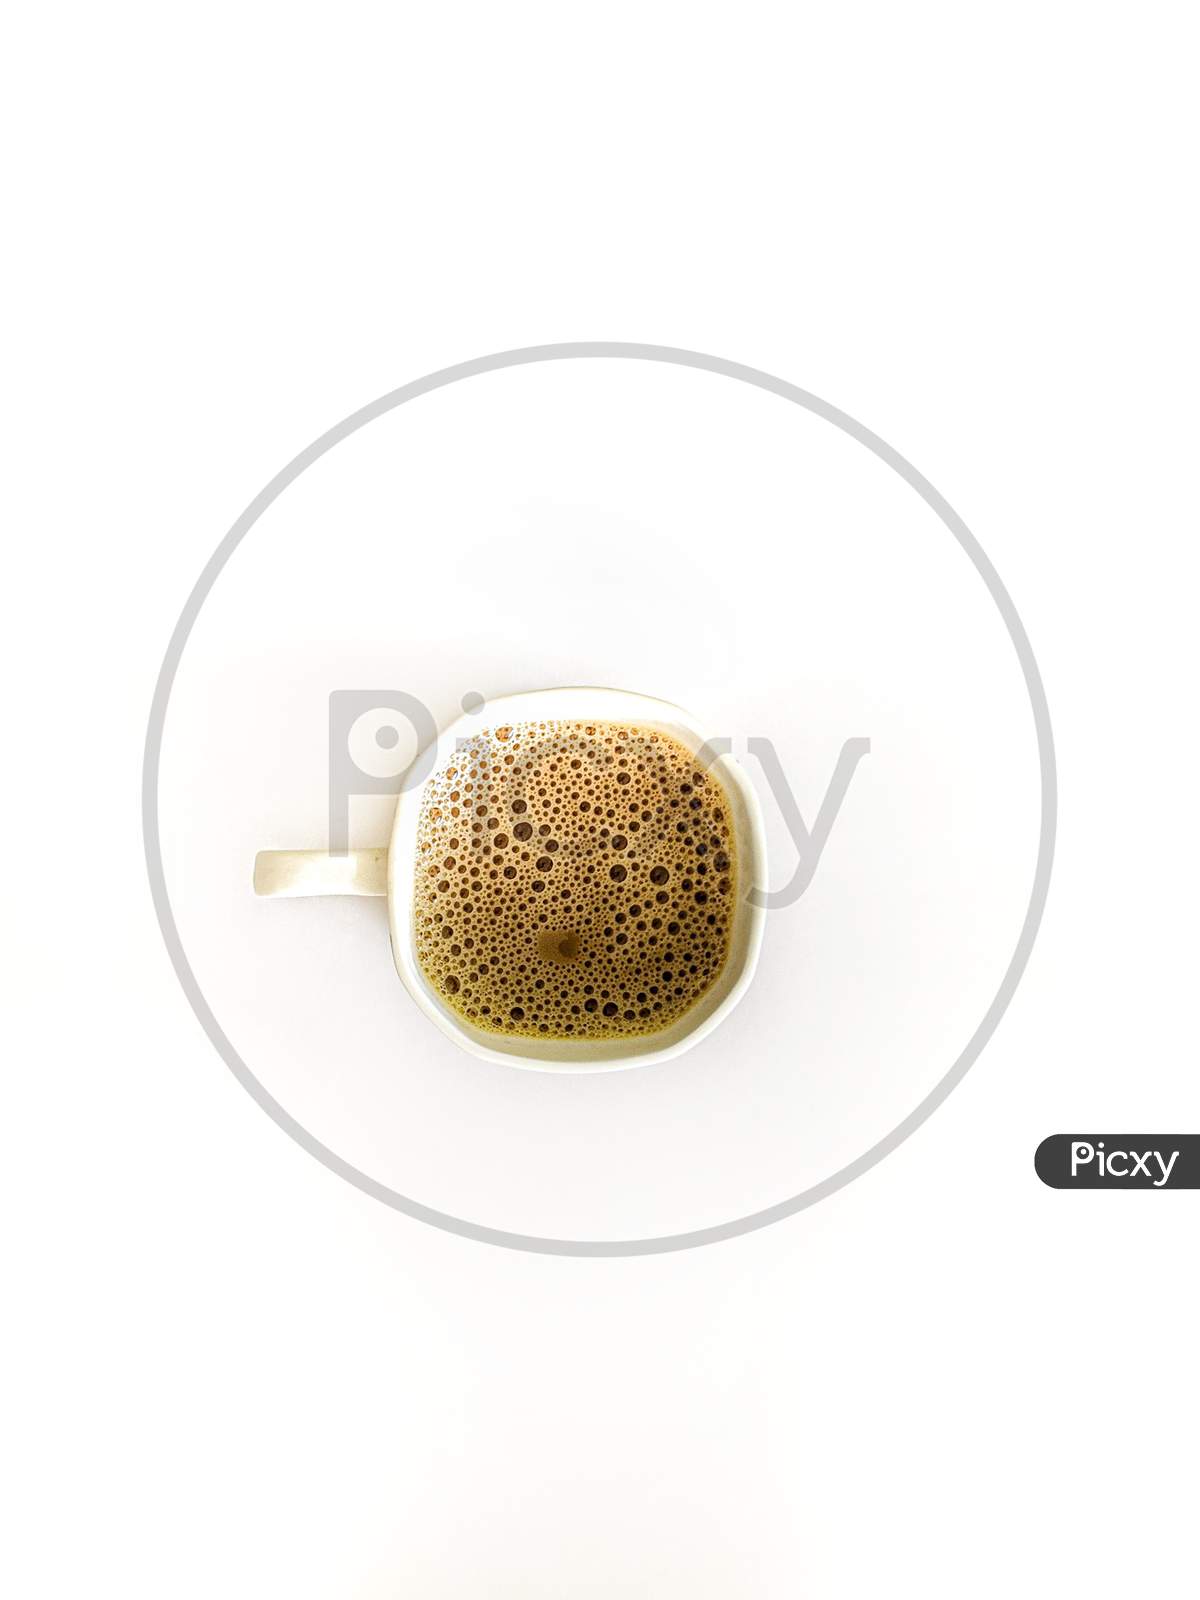 Coffee In a Cup Top View Over White Isolated Background